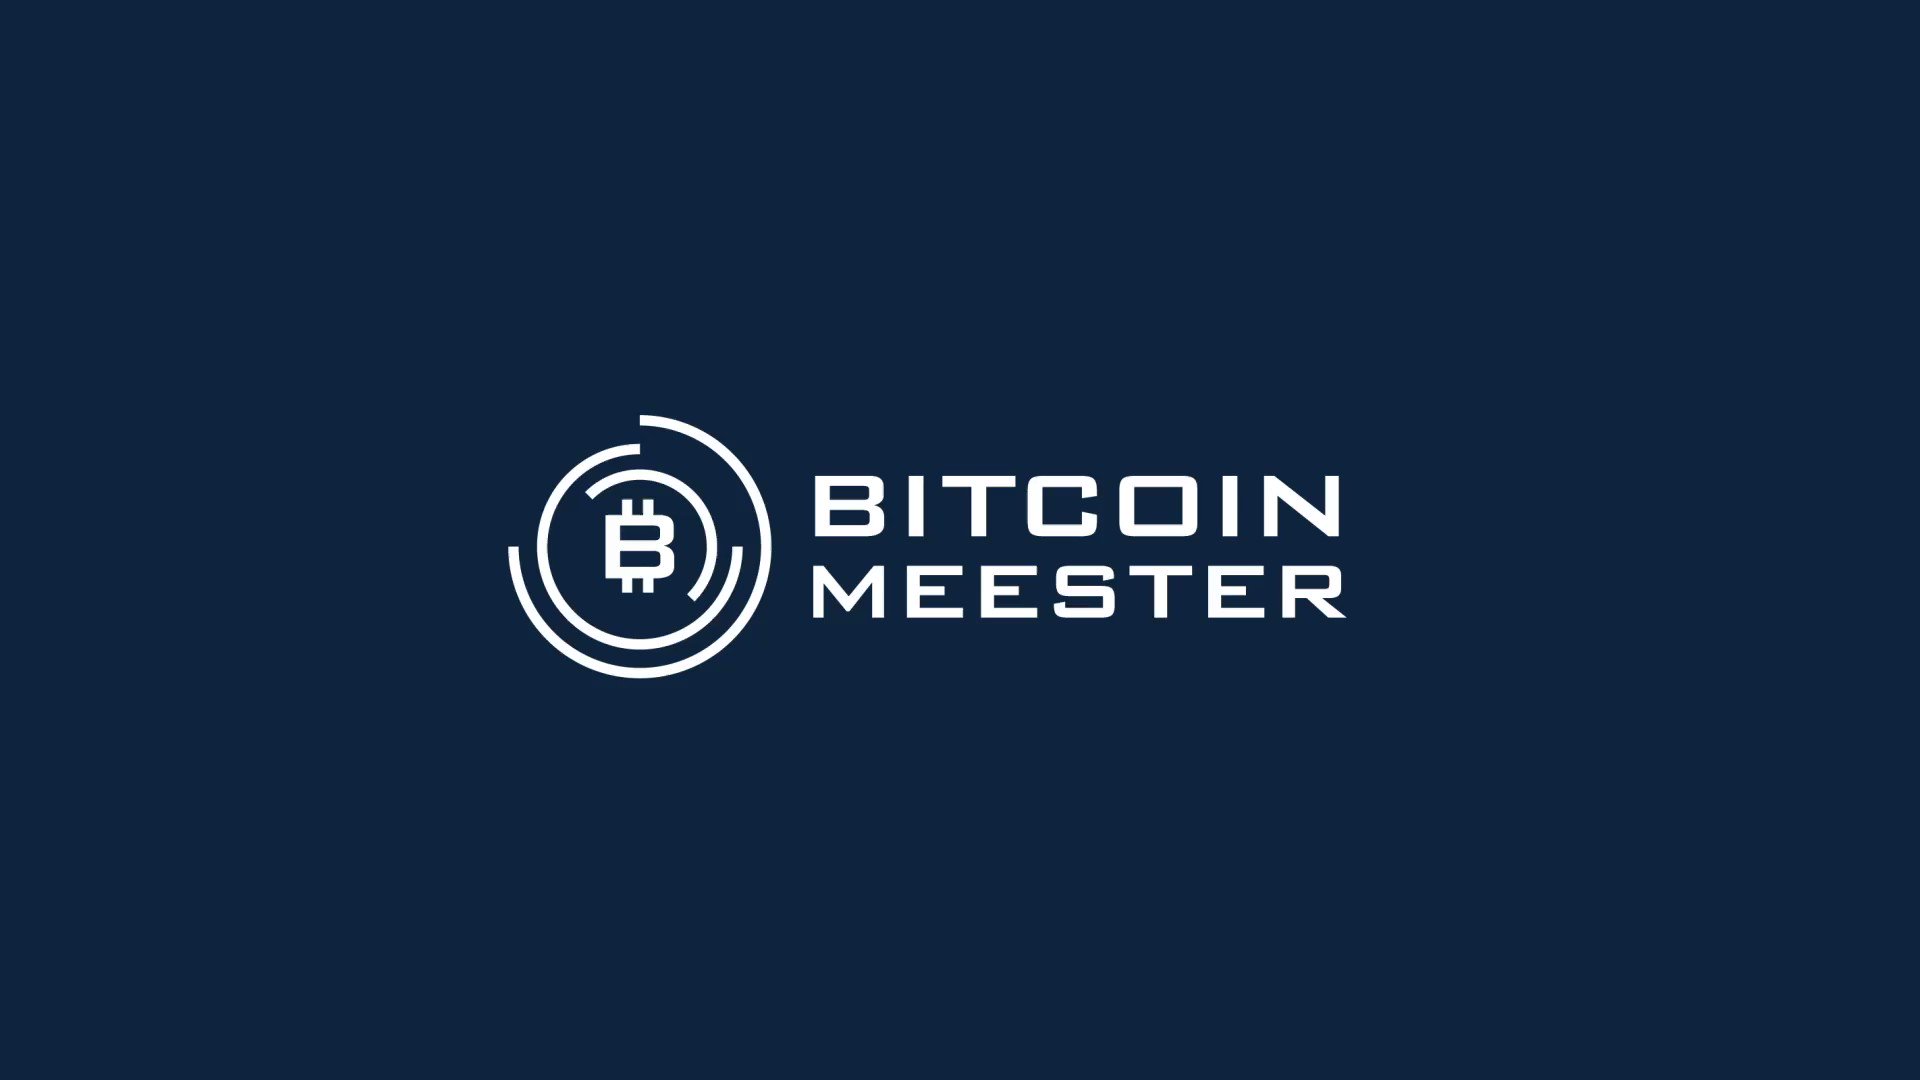 The 1 Bitcoin Show- Grifters in BTC? "Do Something" TERROR! ESG fork, No food shortage! Coinbase jobs, Vegan Meister, $250k paycheck to paycheck?